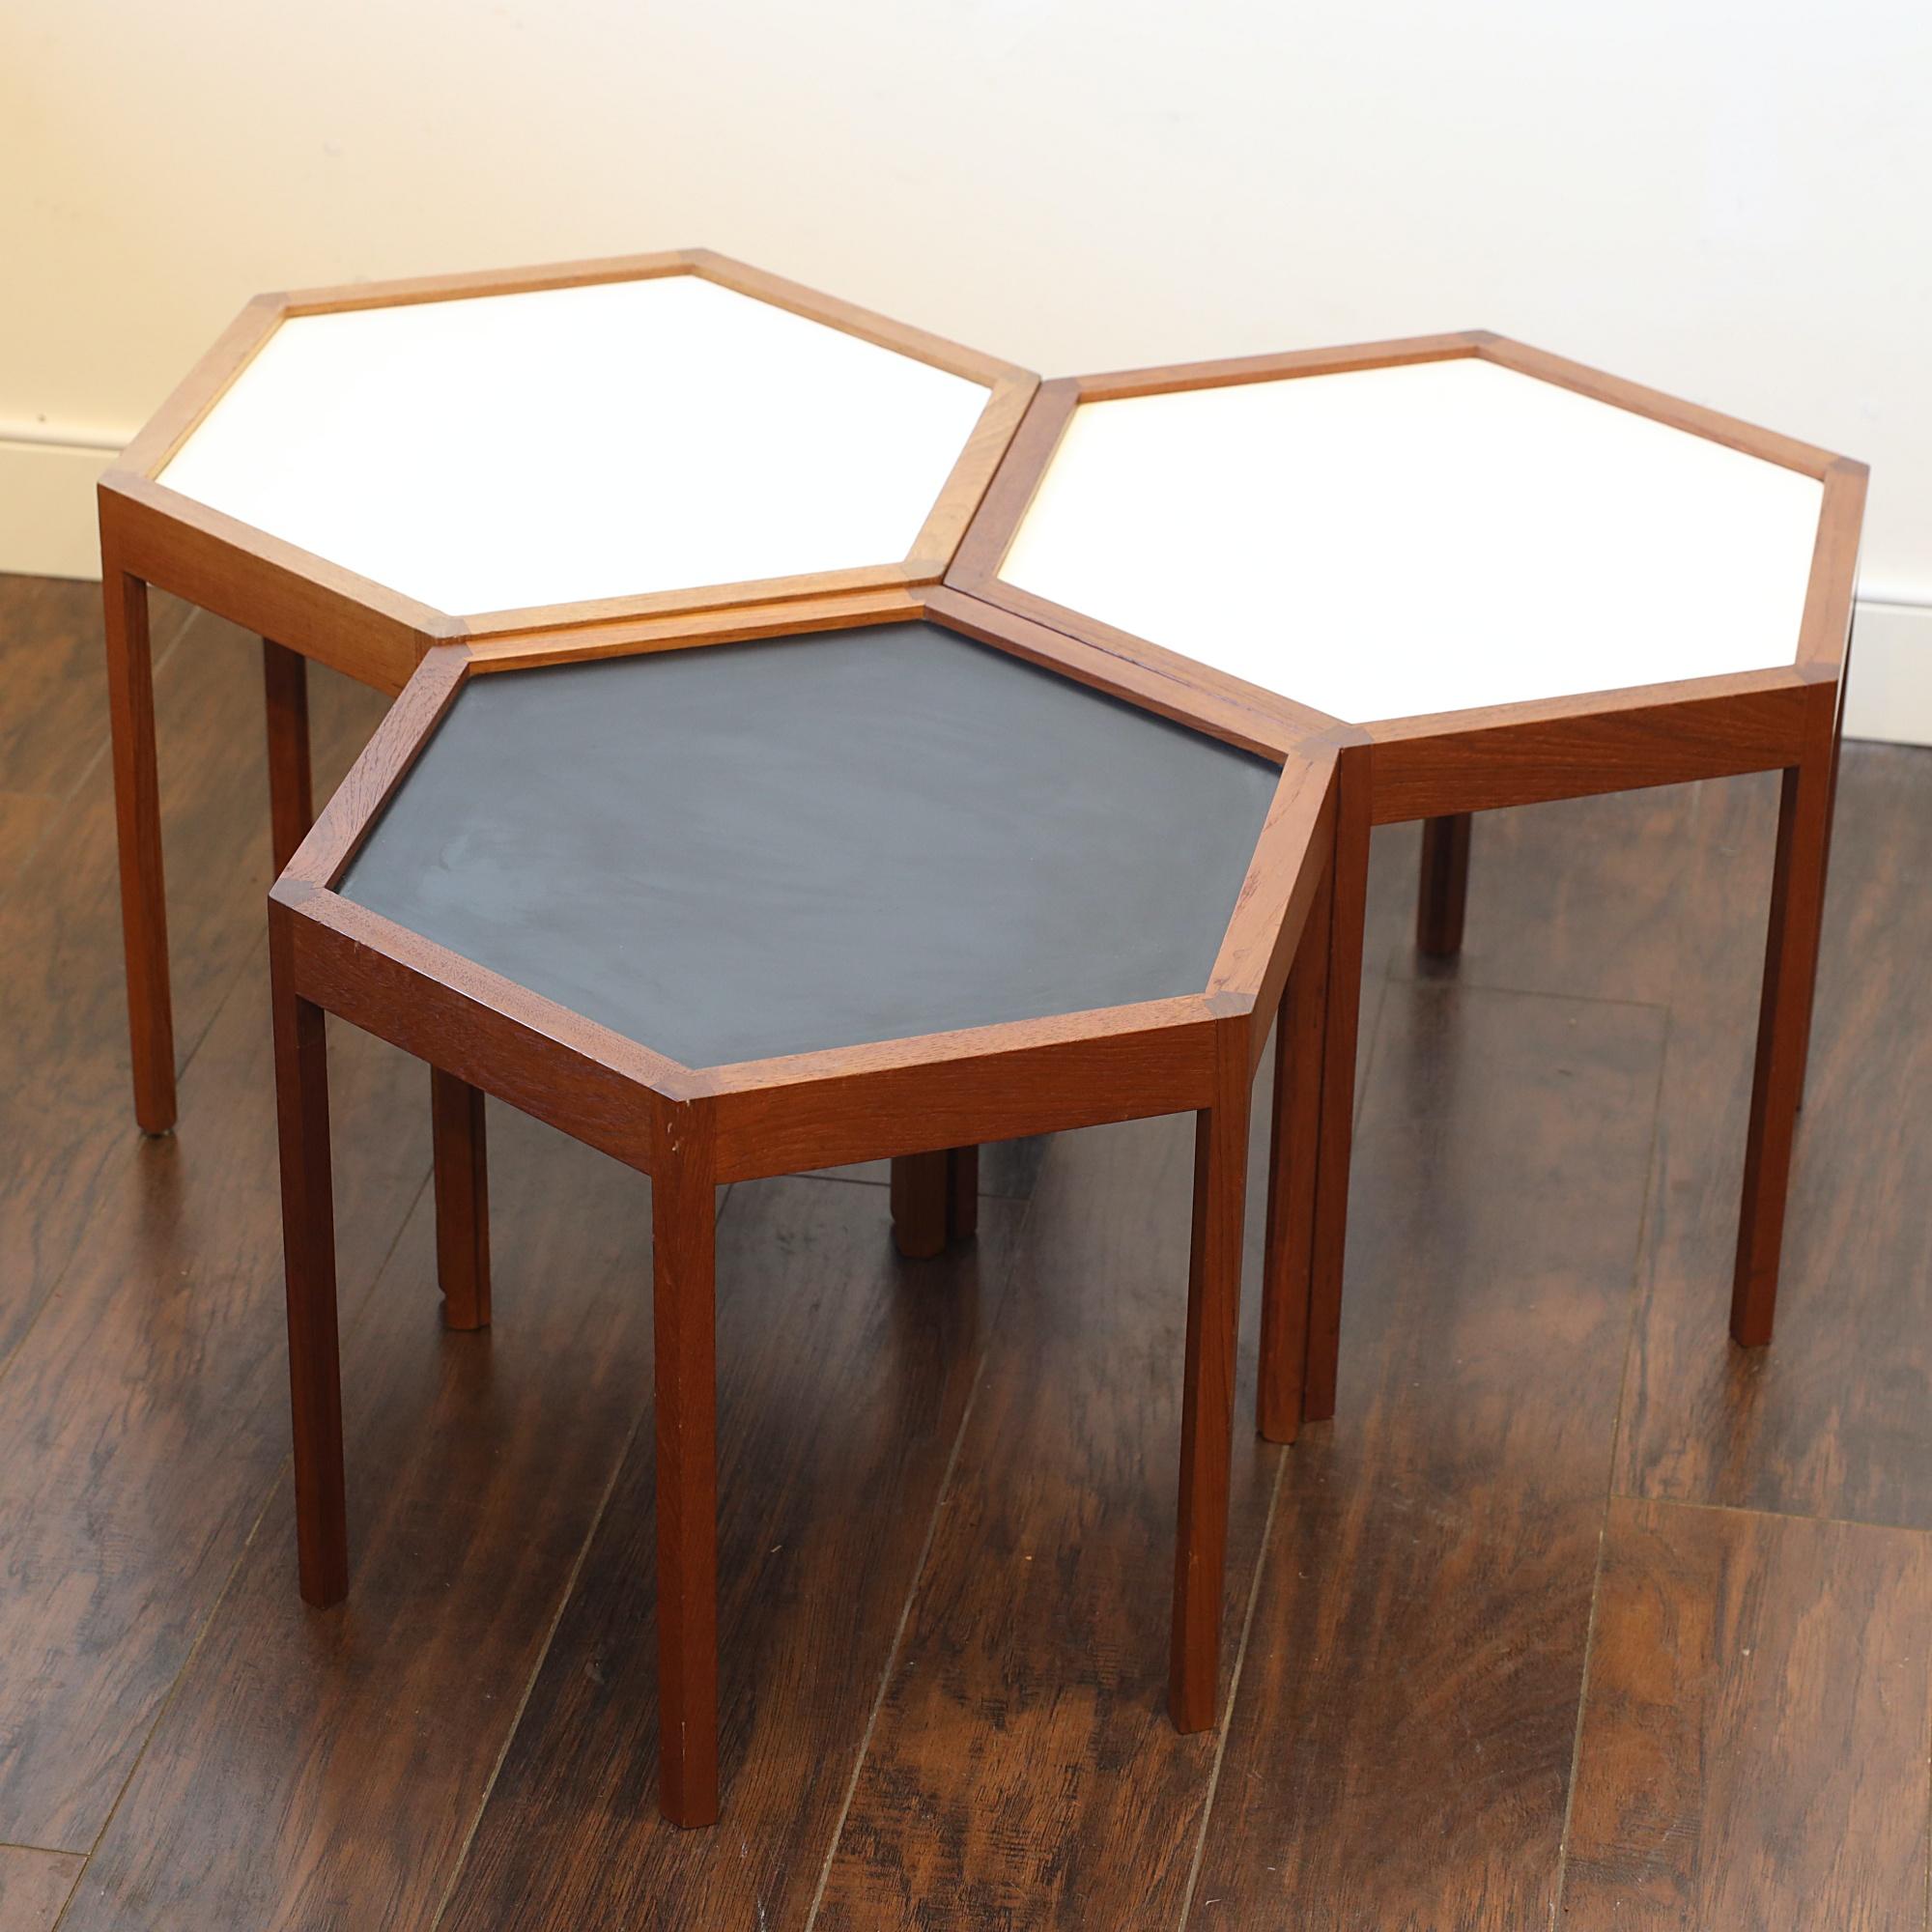 Rare Hexagon teak occasional tables Designed by Hans C. Andersen.
2 of tables are with white formica top and one in black.
Excellent detailing and craftsmanship and many of variation could be made.
1 long shape, all together round shape ore